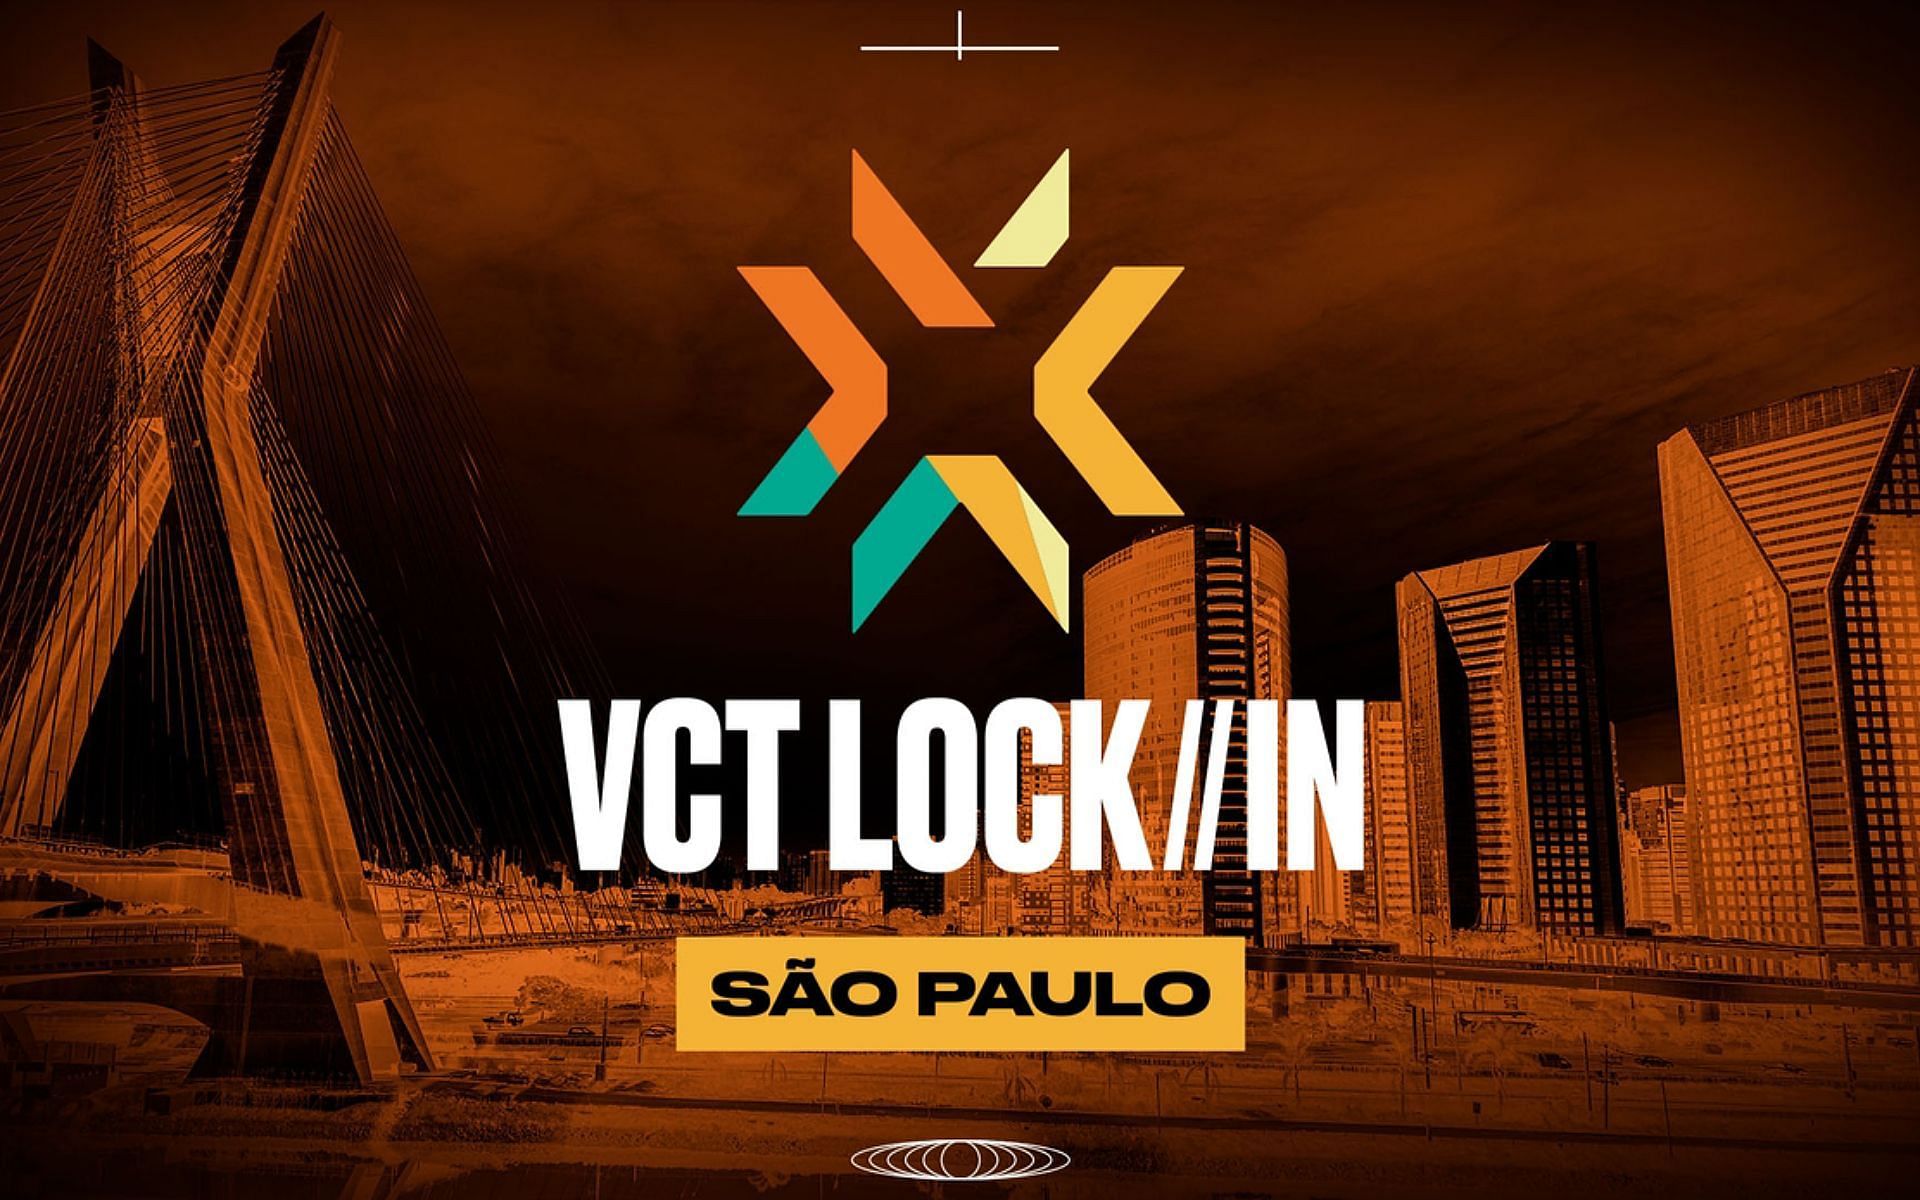 VCT LOCK//IN Brazil 2023 tickets details (Image via Riot Games)